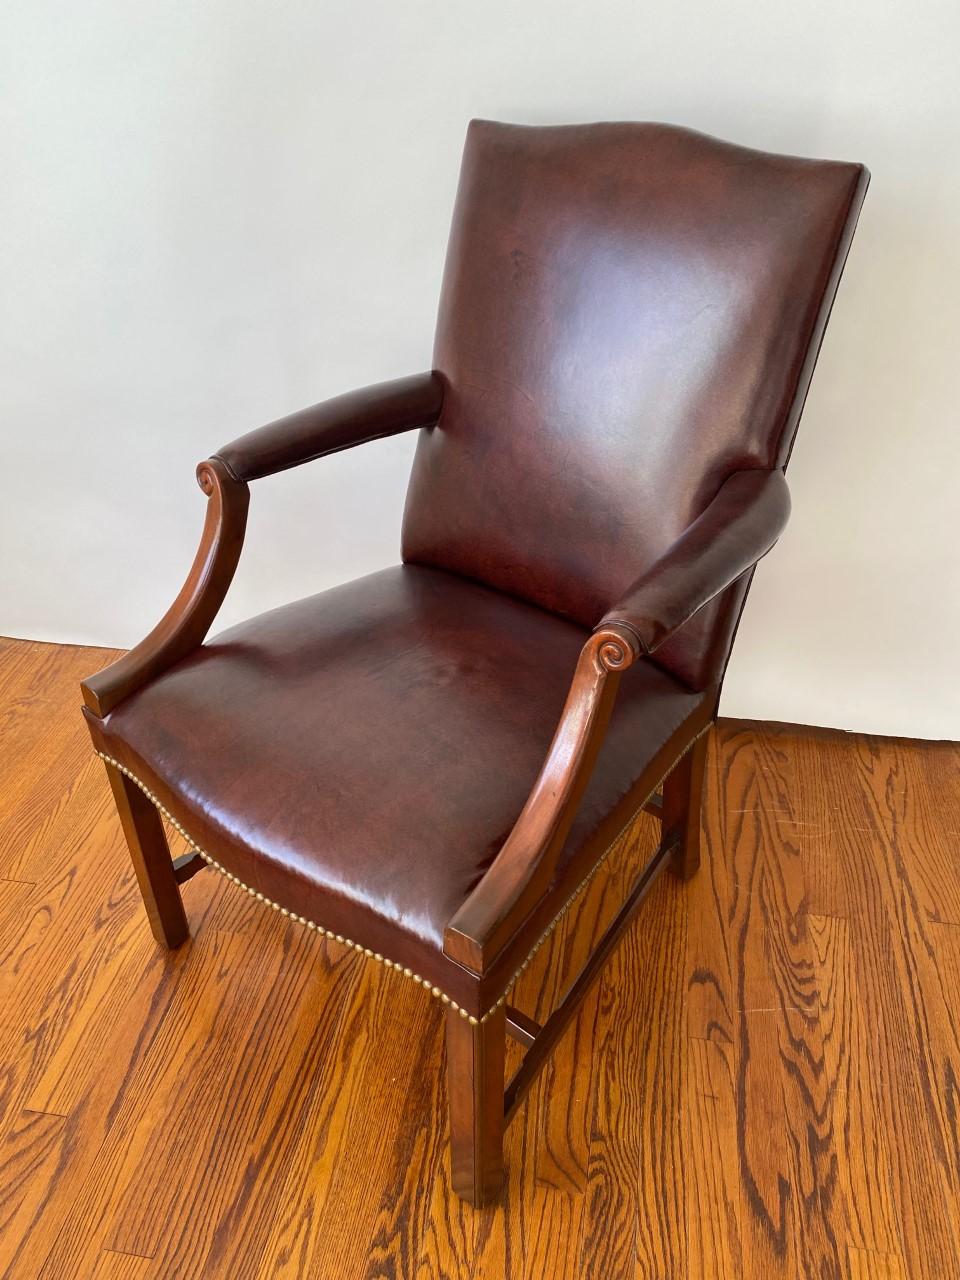 This new handsome Chippendale style mahogany gainsborough chair sits comfortably in the office, den, library or living room. The serpentine shaped top and seat front, along with, the uncommon chamfered stretcher add to its distinction. This